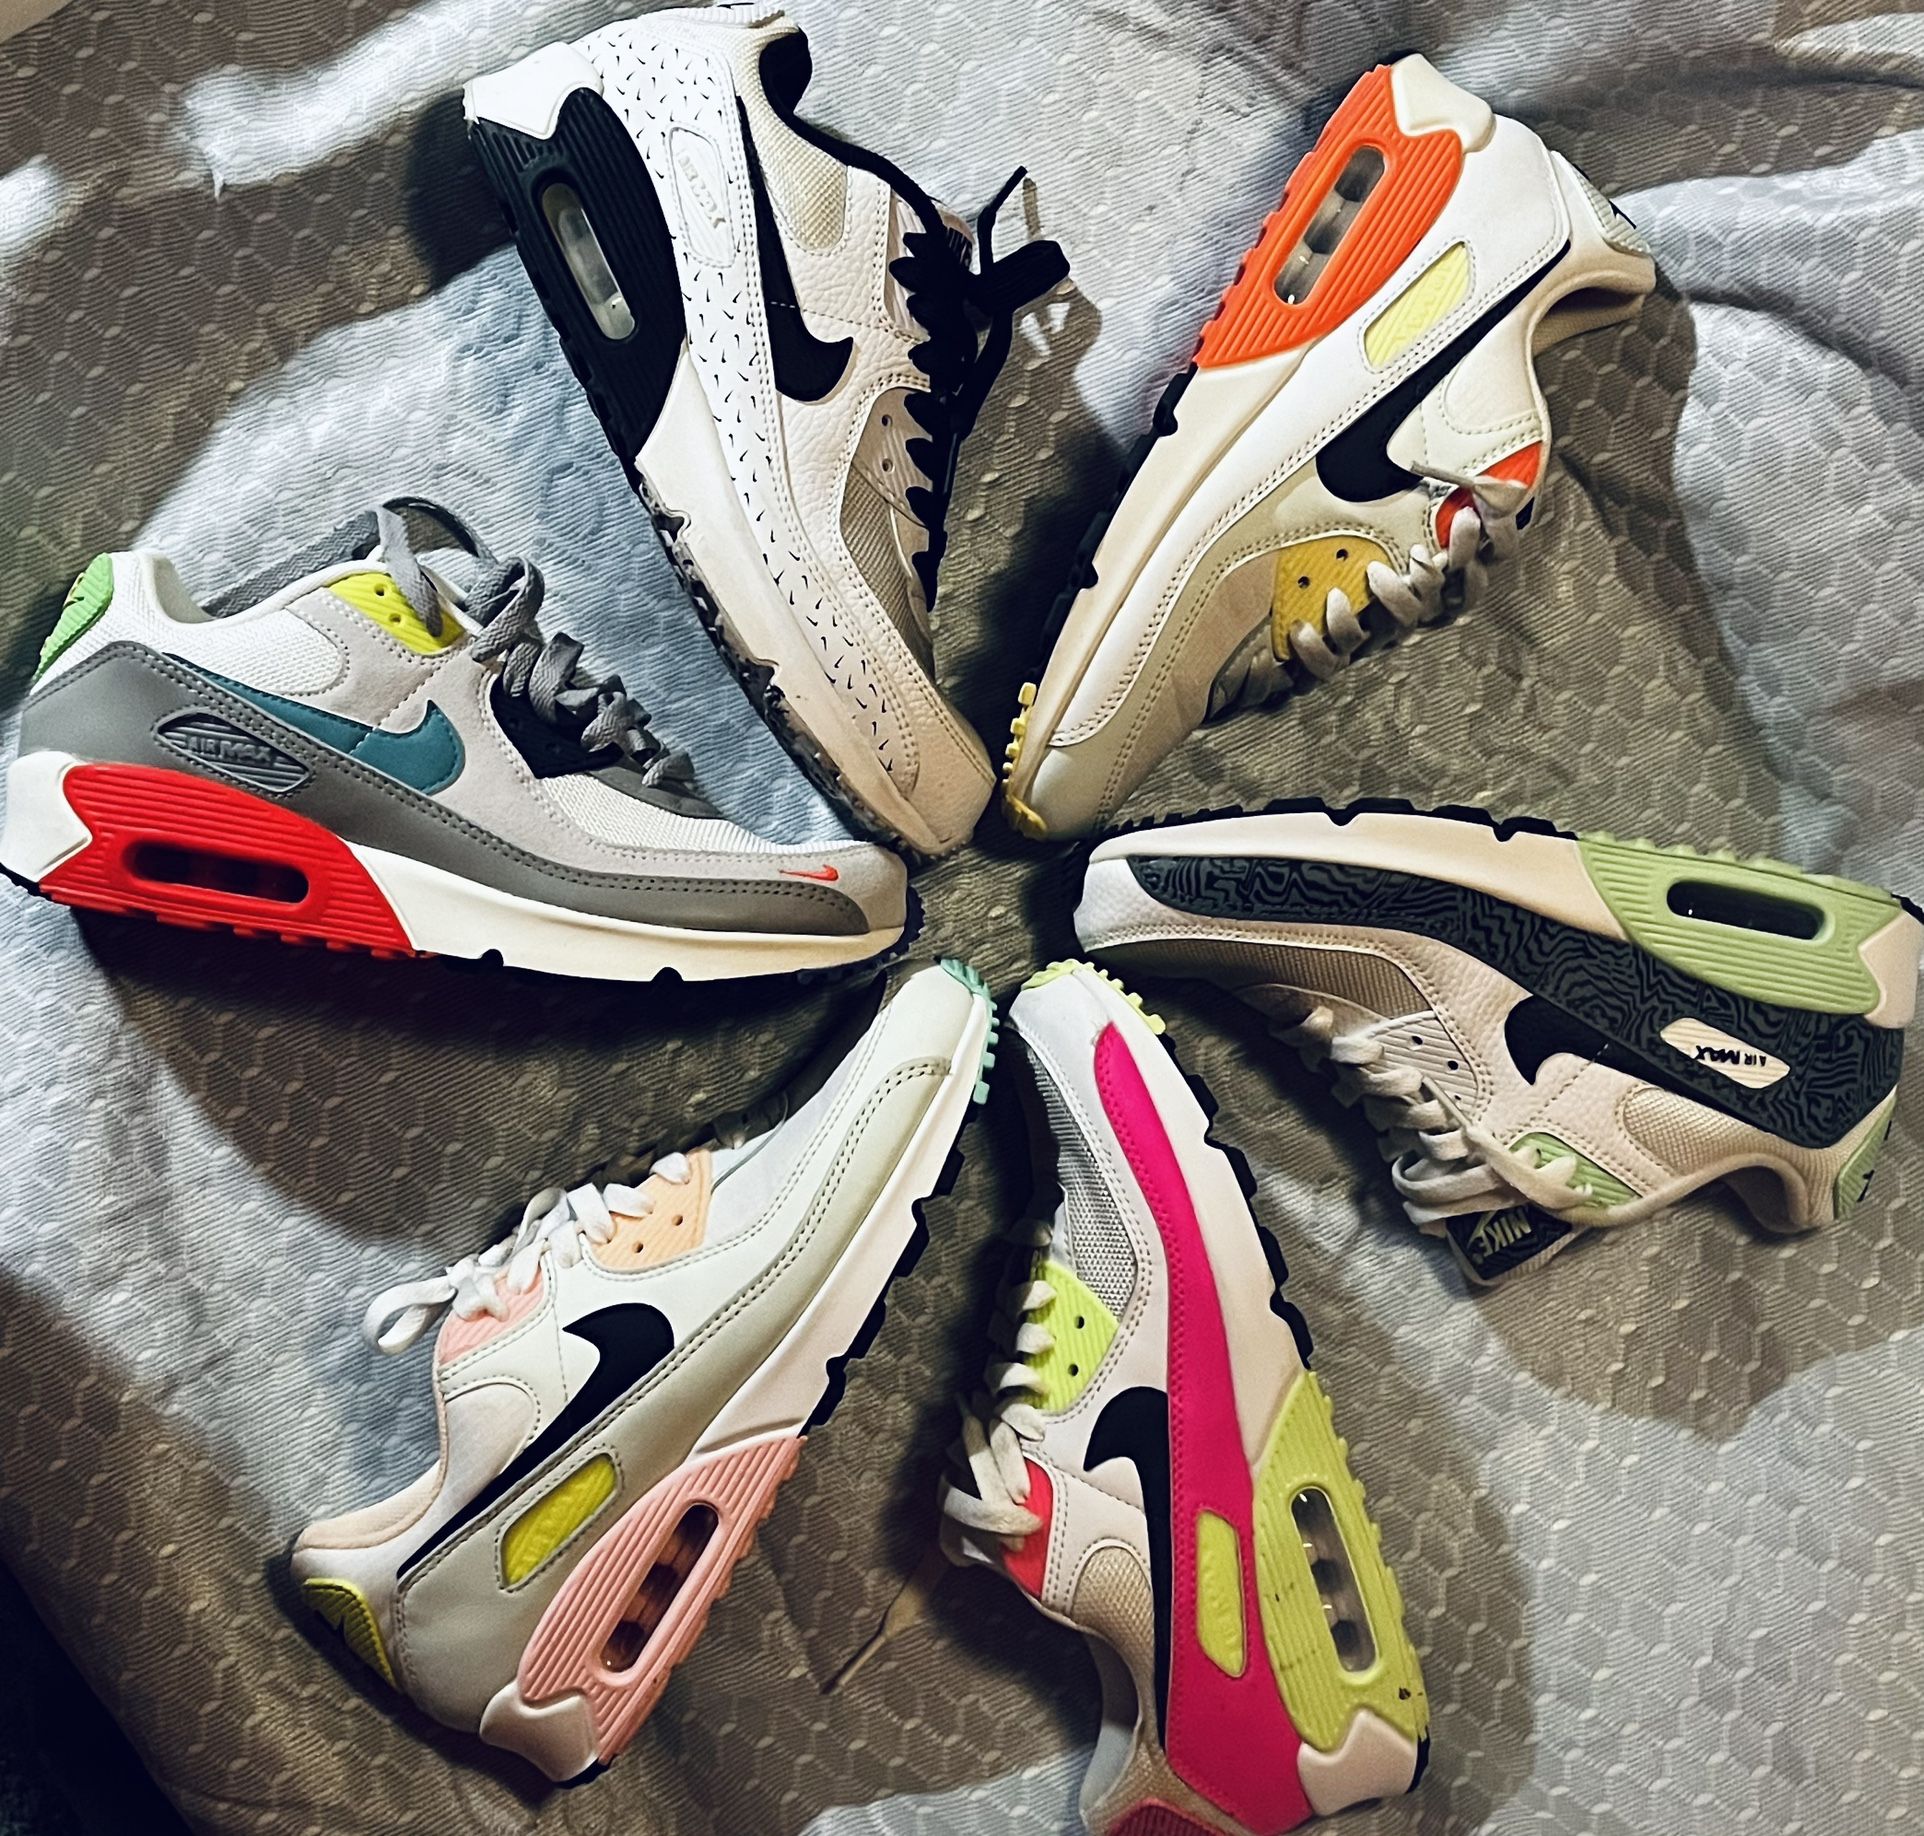 Air Max - Need Gone Asap